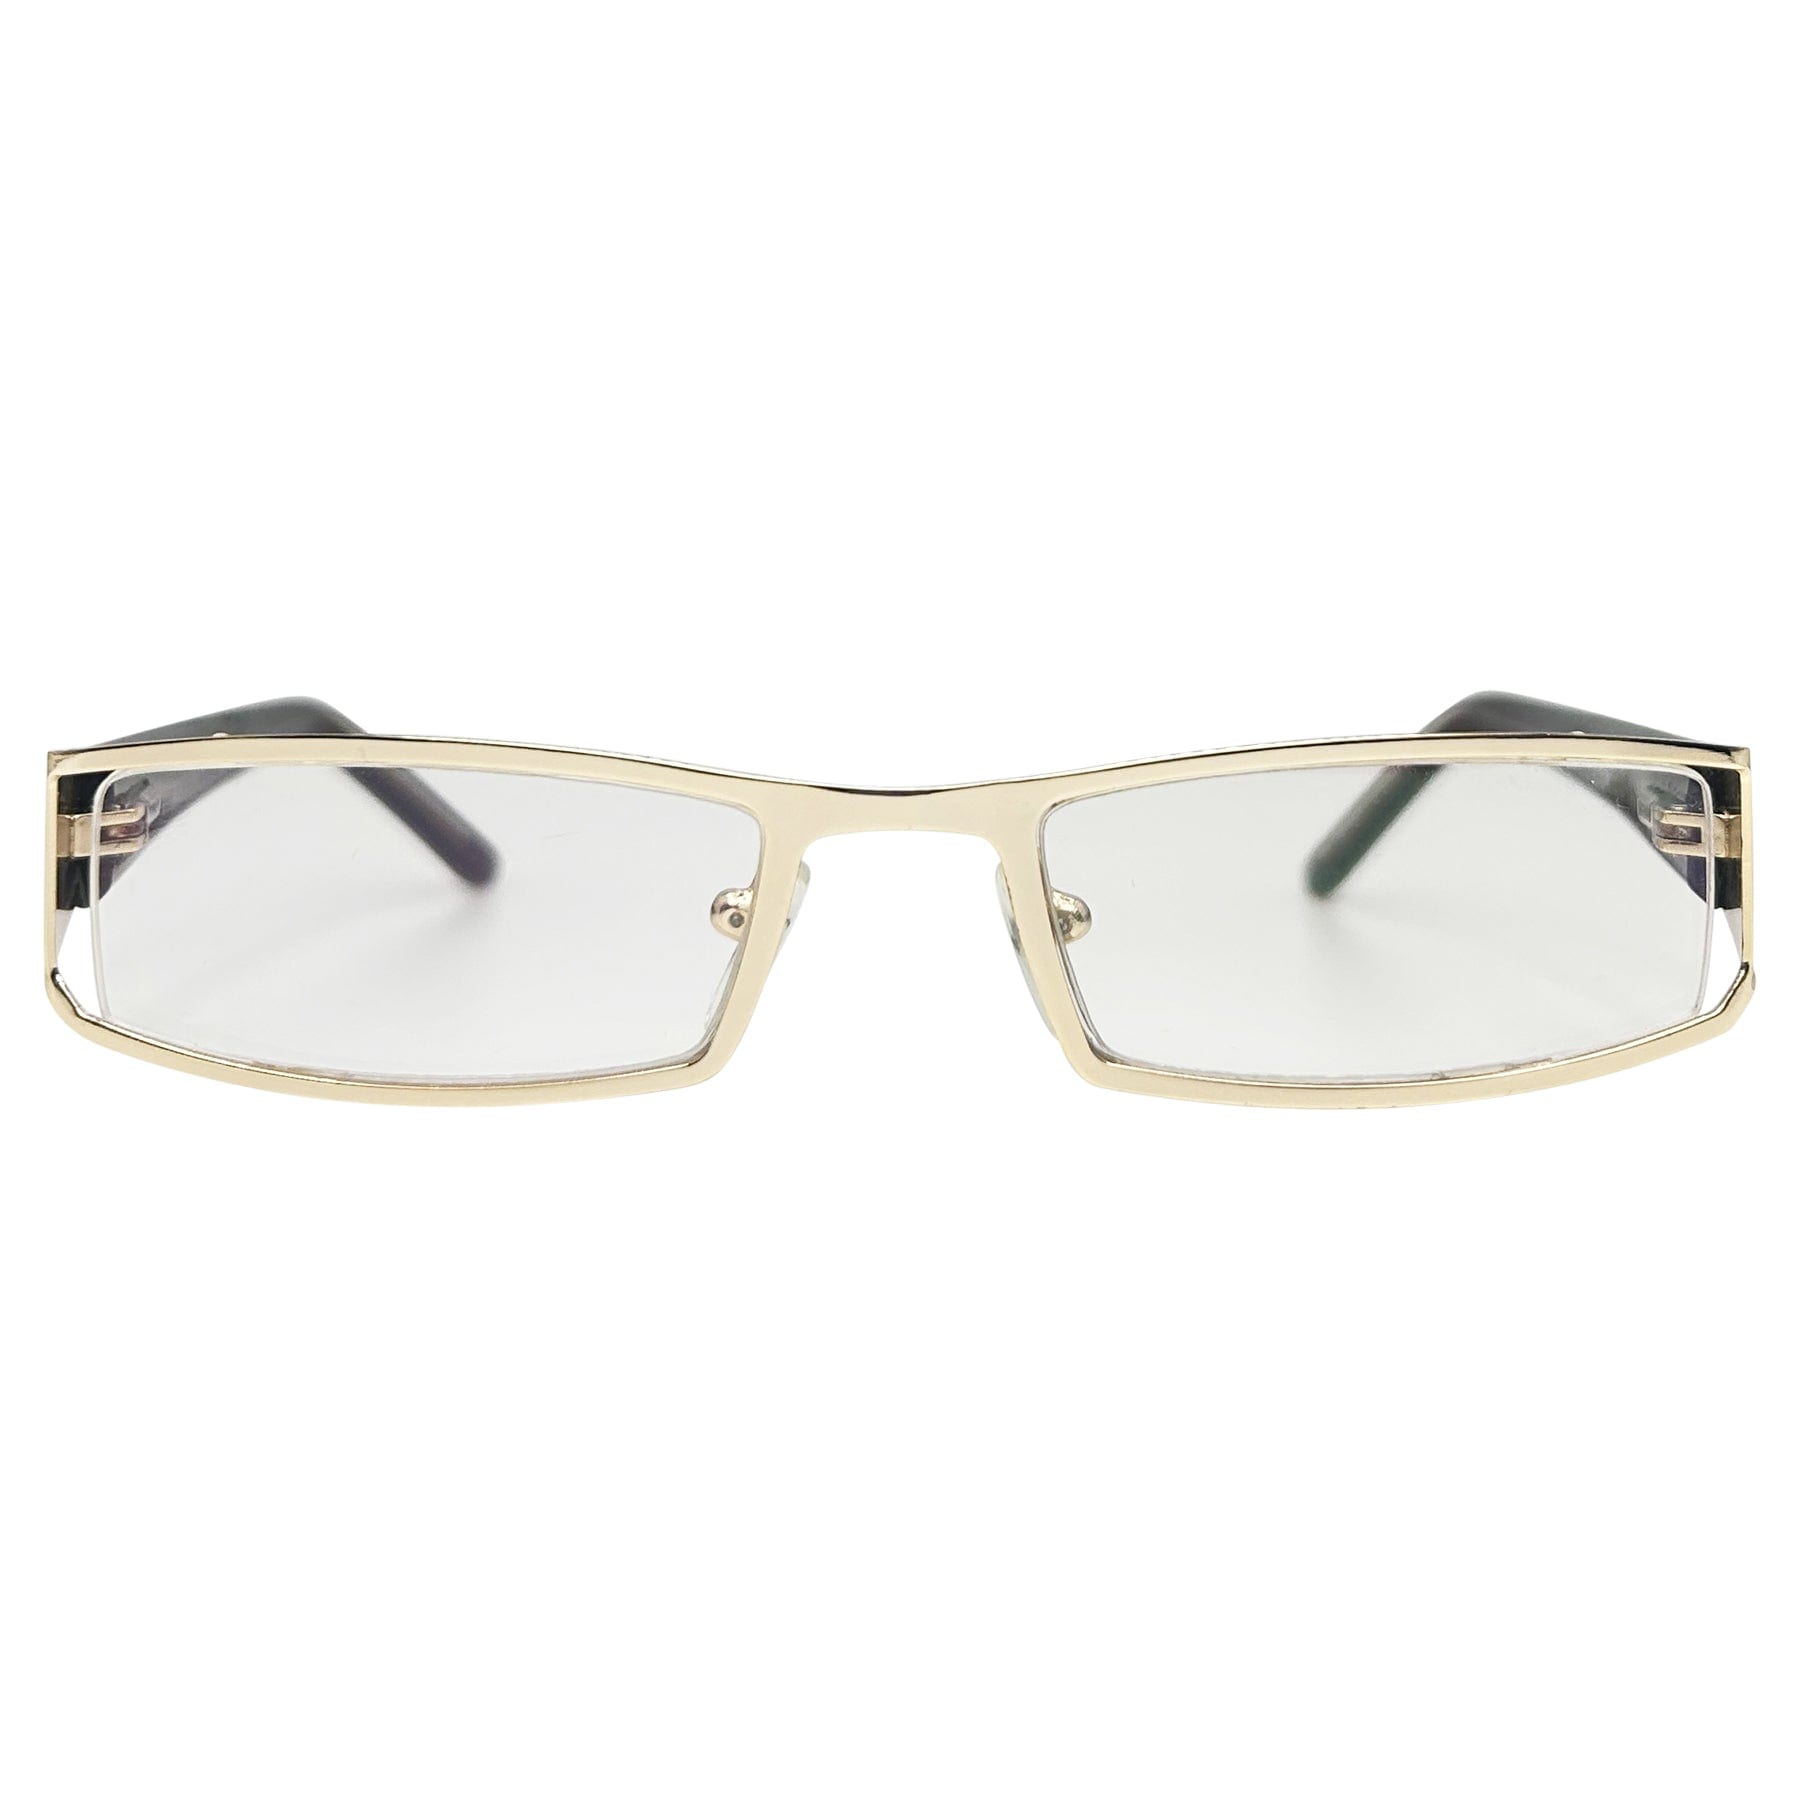 90s bayonetta-style retro glasses with a gold metal frame and clear lens